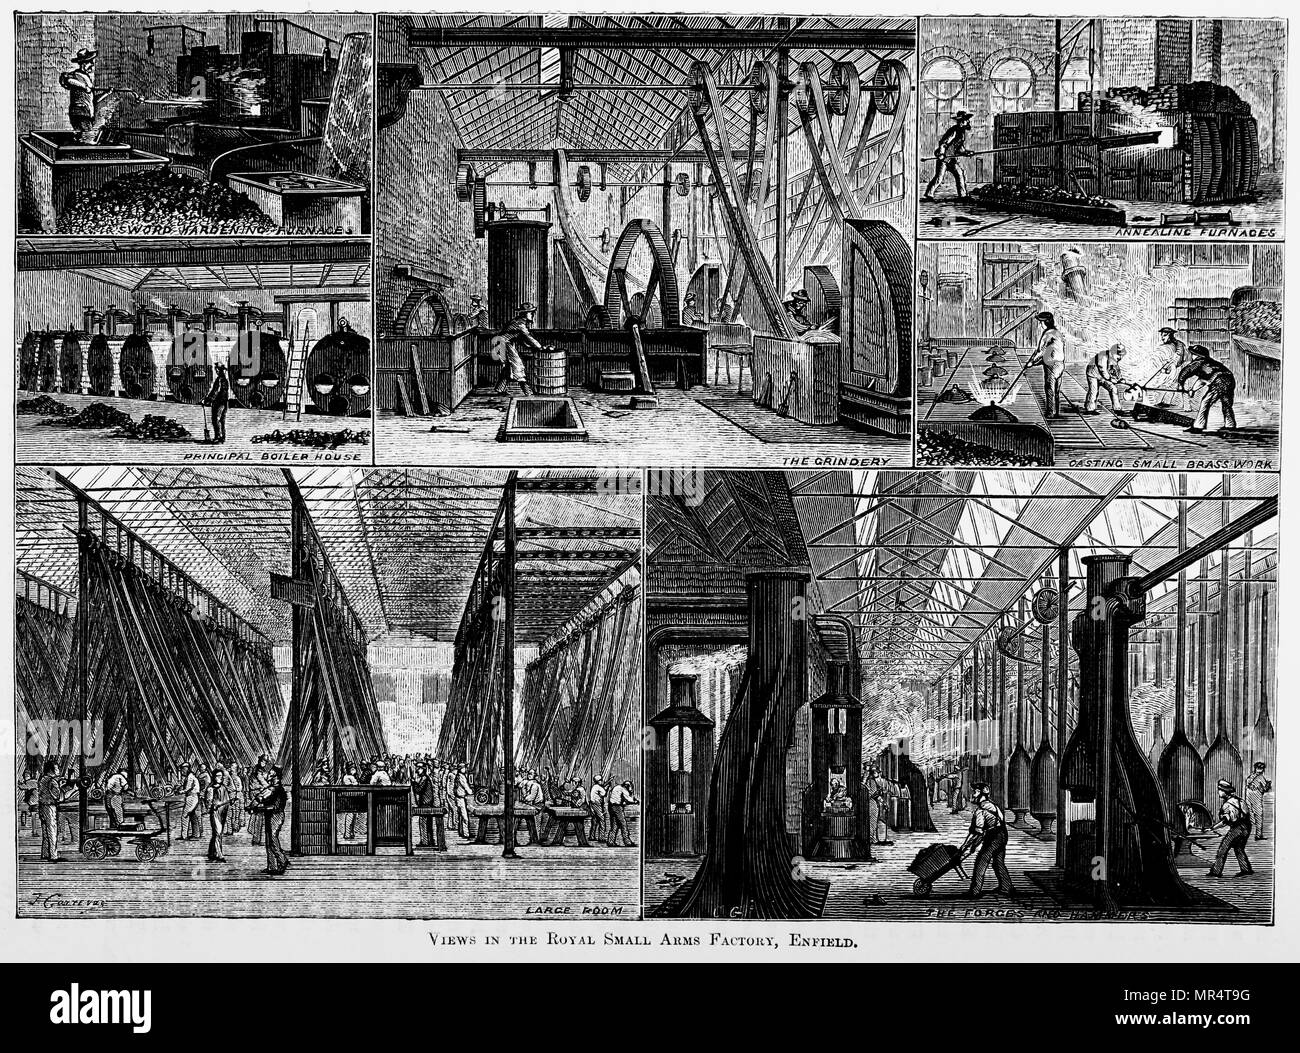 Engraving depicting scenes from within the Royal Small Arms Factory in Enfield Lock, Middlesex. Various departments engaged in producing swords and small arms for the British government. The bottom two pictures show workshops with ridge and furrow roofs with north facing skylights for even lighting. The one on the left shows ranks of machines powered by shafts and belting. Dated 19th century Stock Photo